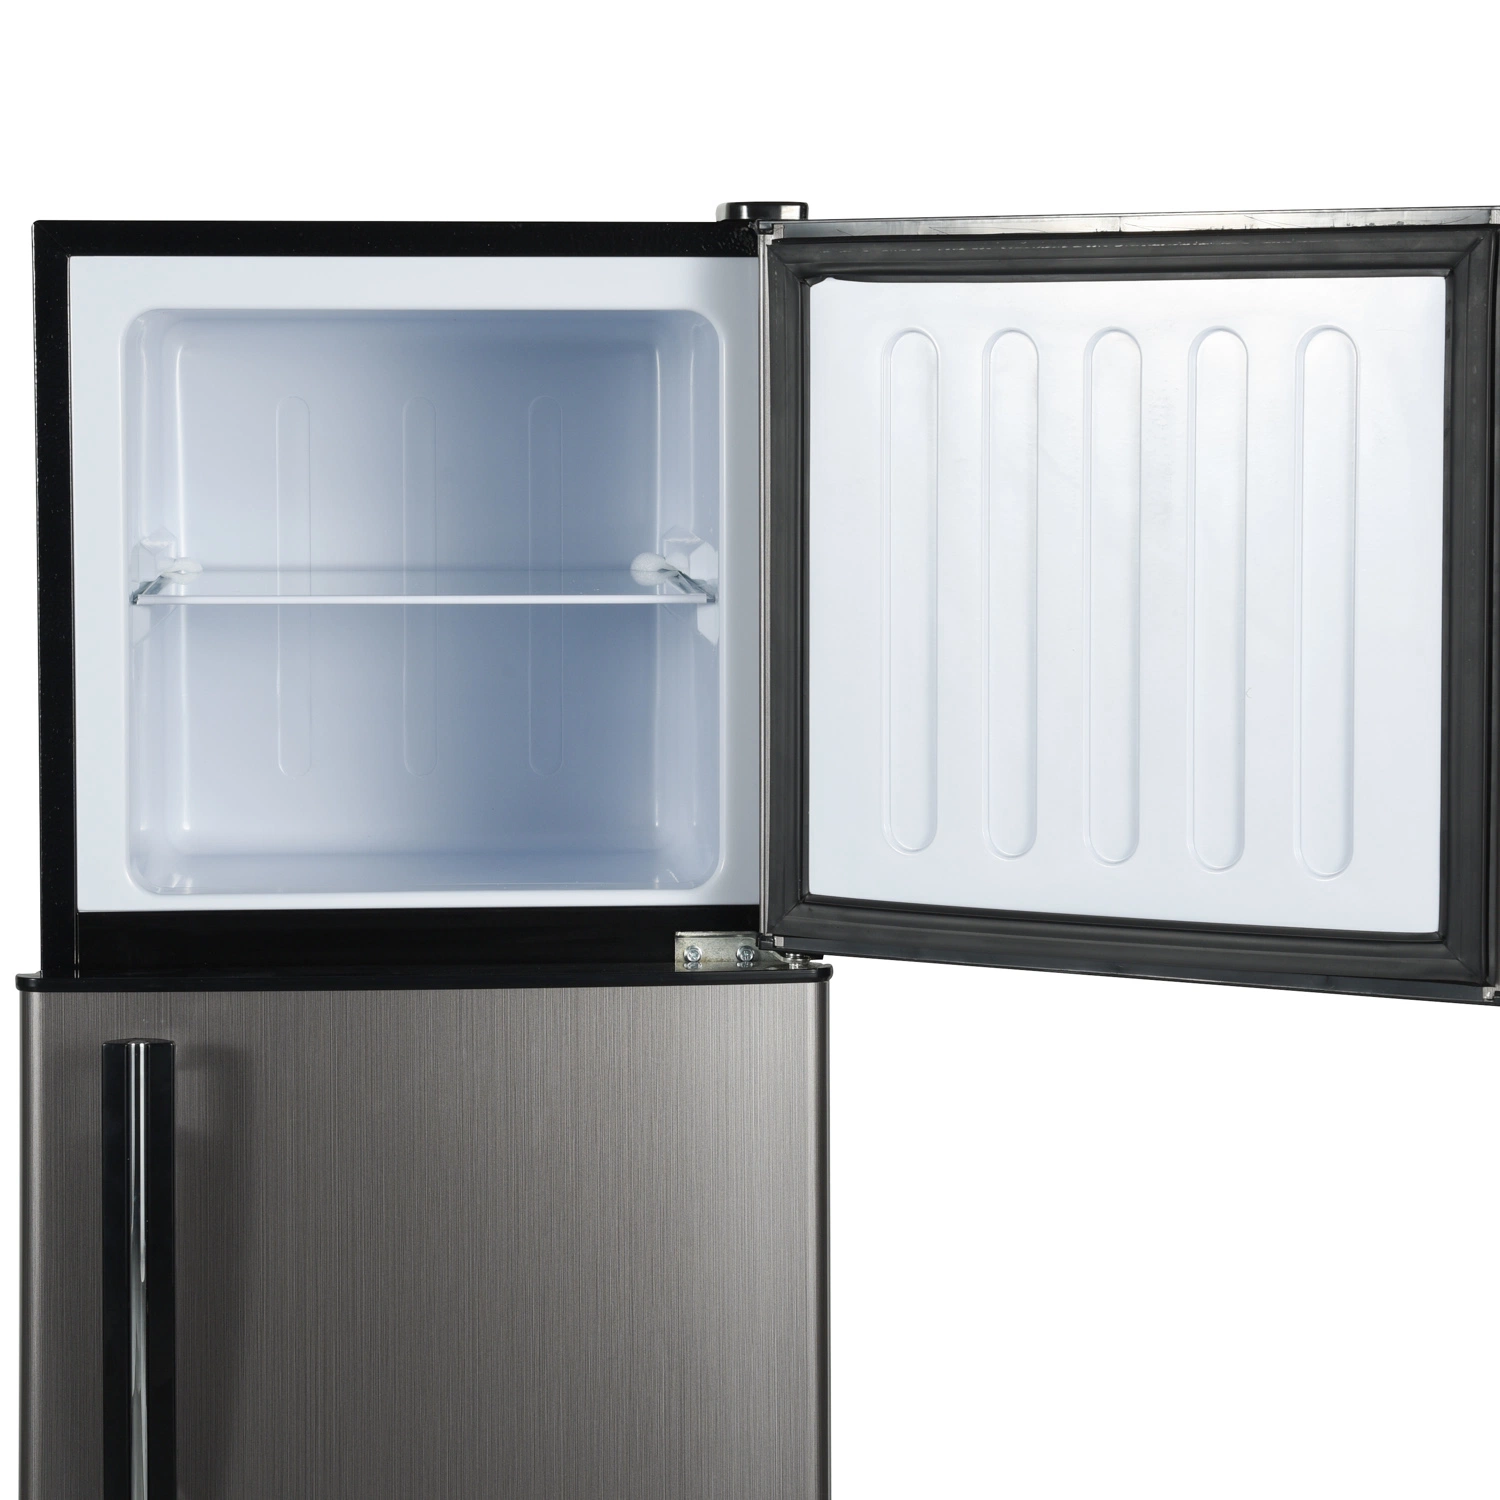 Bcd-138 Modern Electric Double Door Cold Drink Kitchen Refrigerator Home Appliance Refrigerators